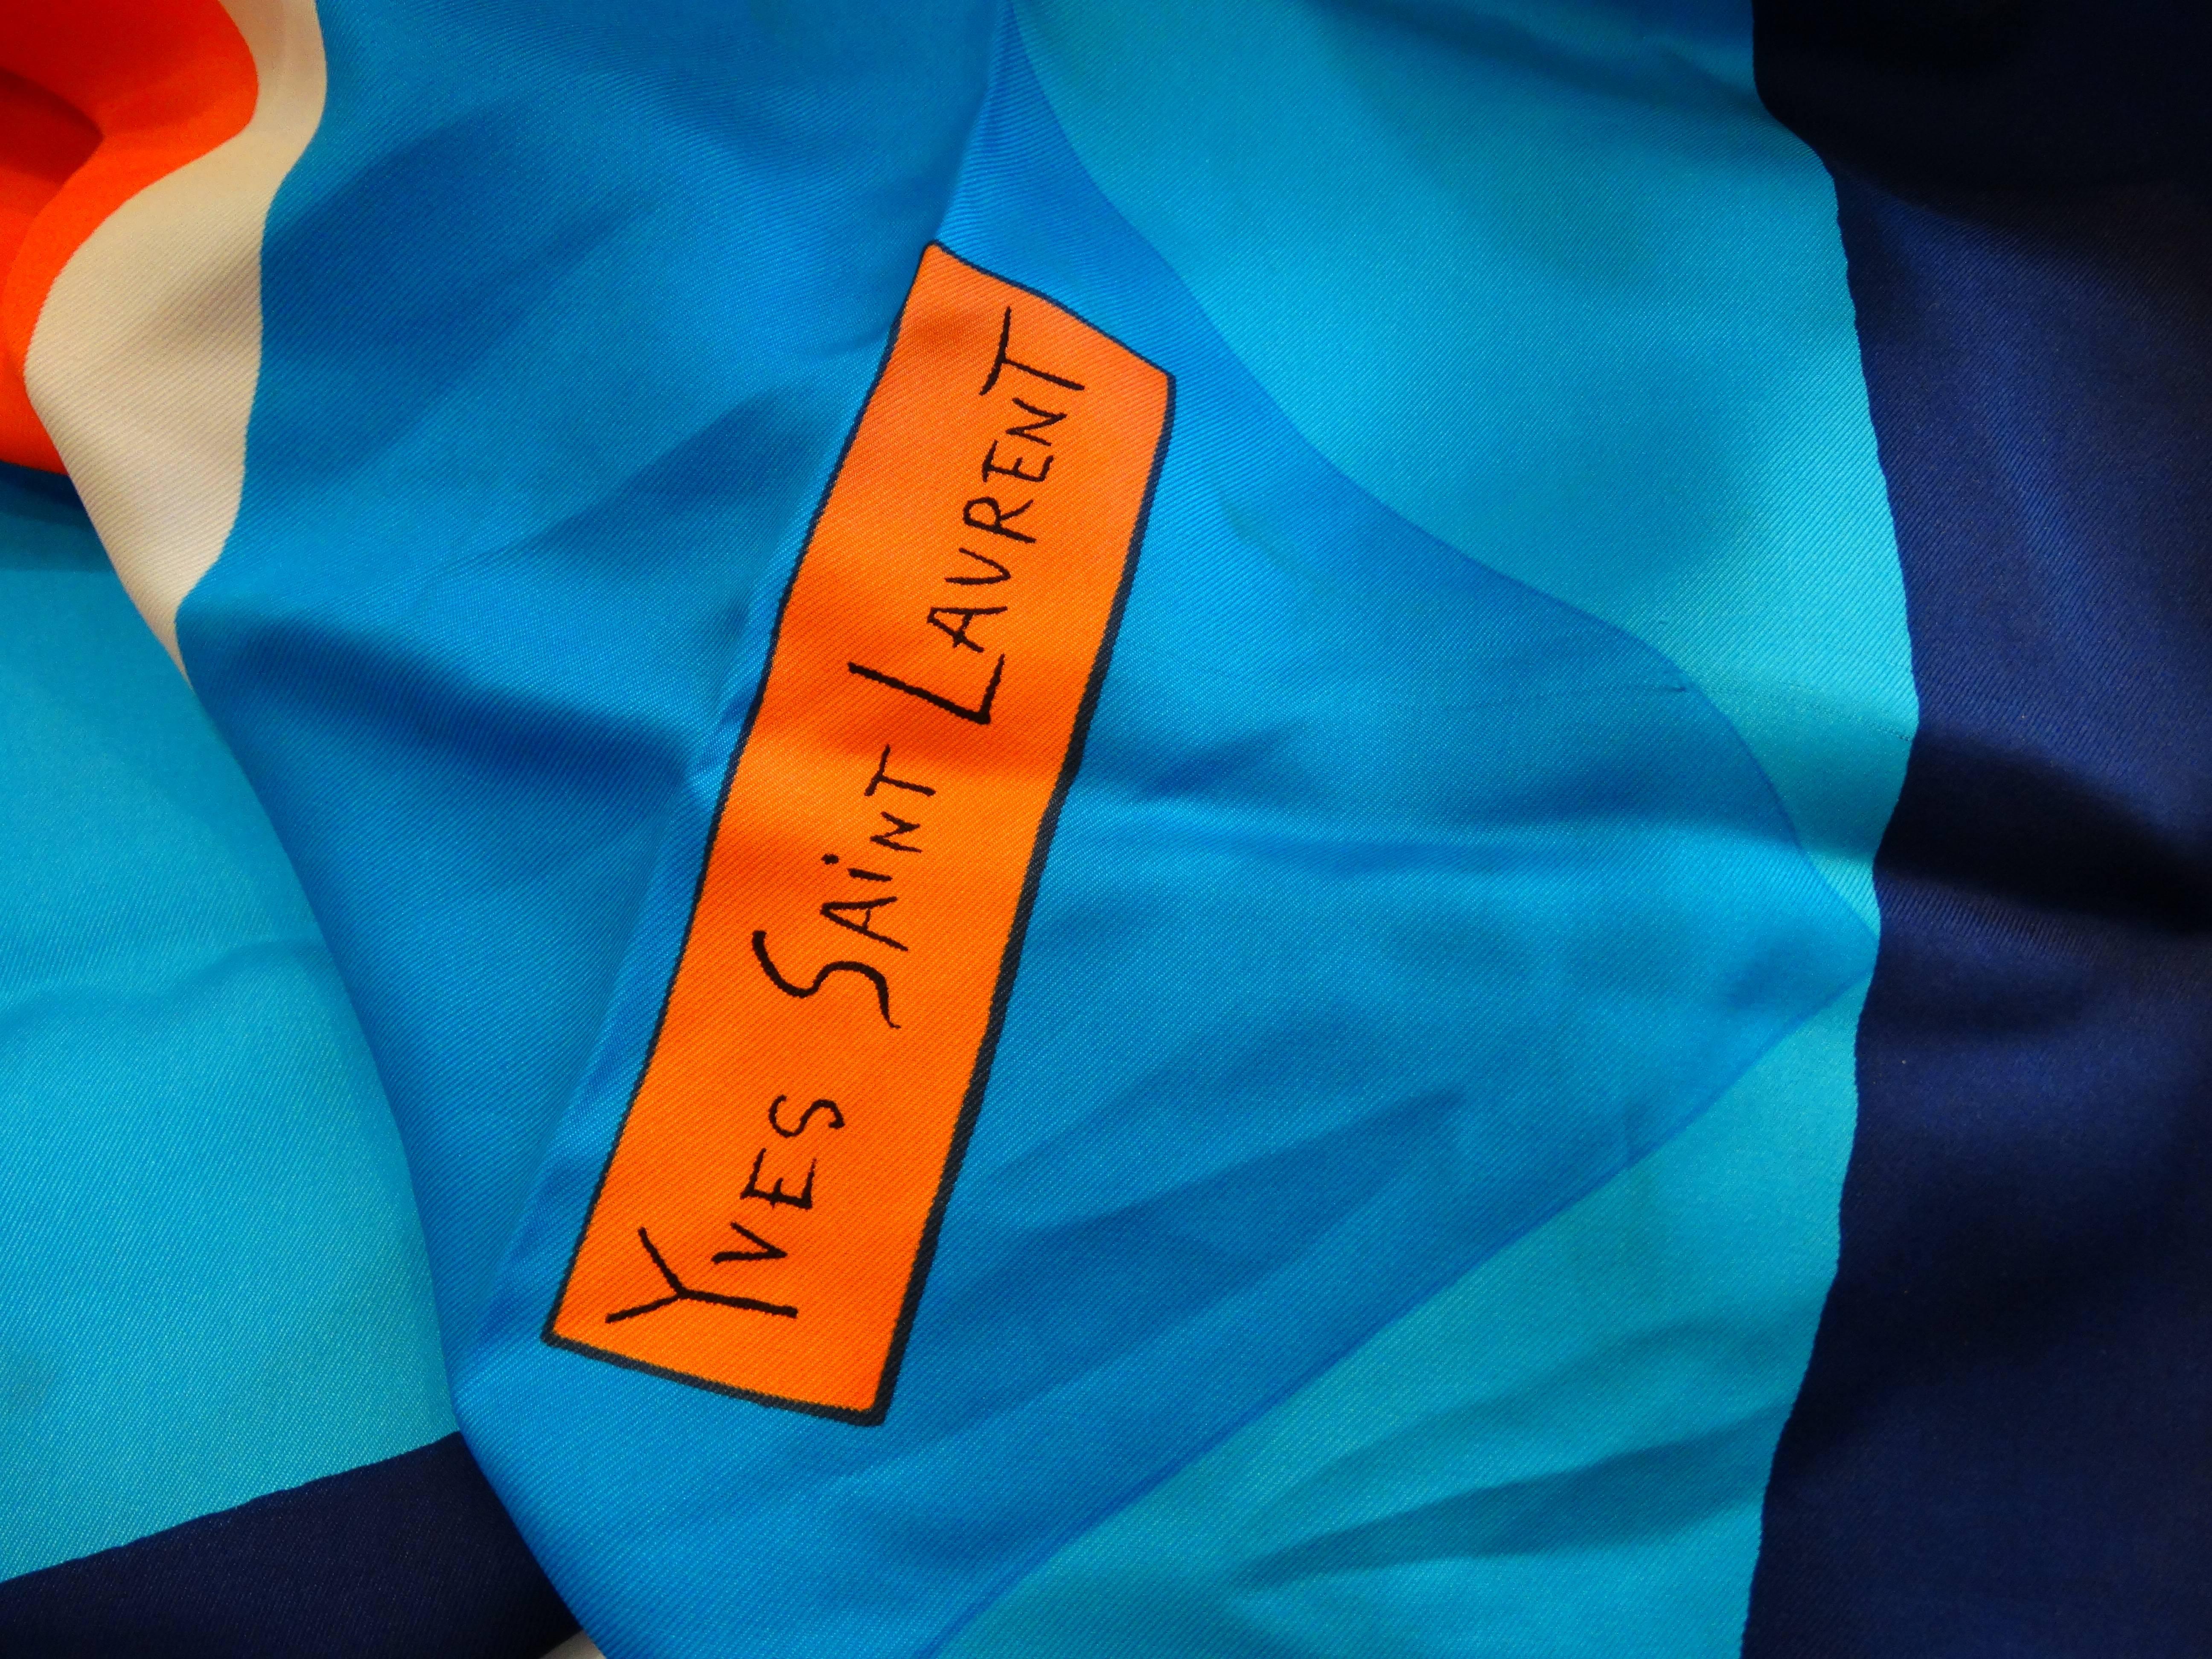 This amazing 1960s Yves Saint Laurent scarf evokes the work of Josef Albers- with contrasting coral and blue colors in geometric blocks throughout the print of the piece. This piece is versatile! Wear it as a headscarf, knotted as an ascot, or tie